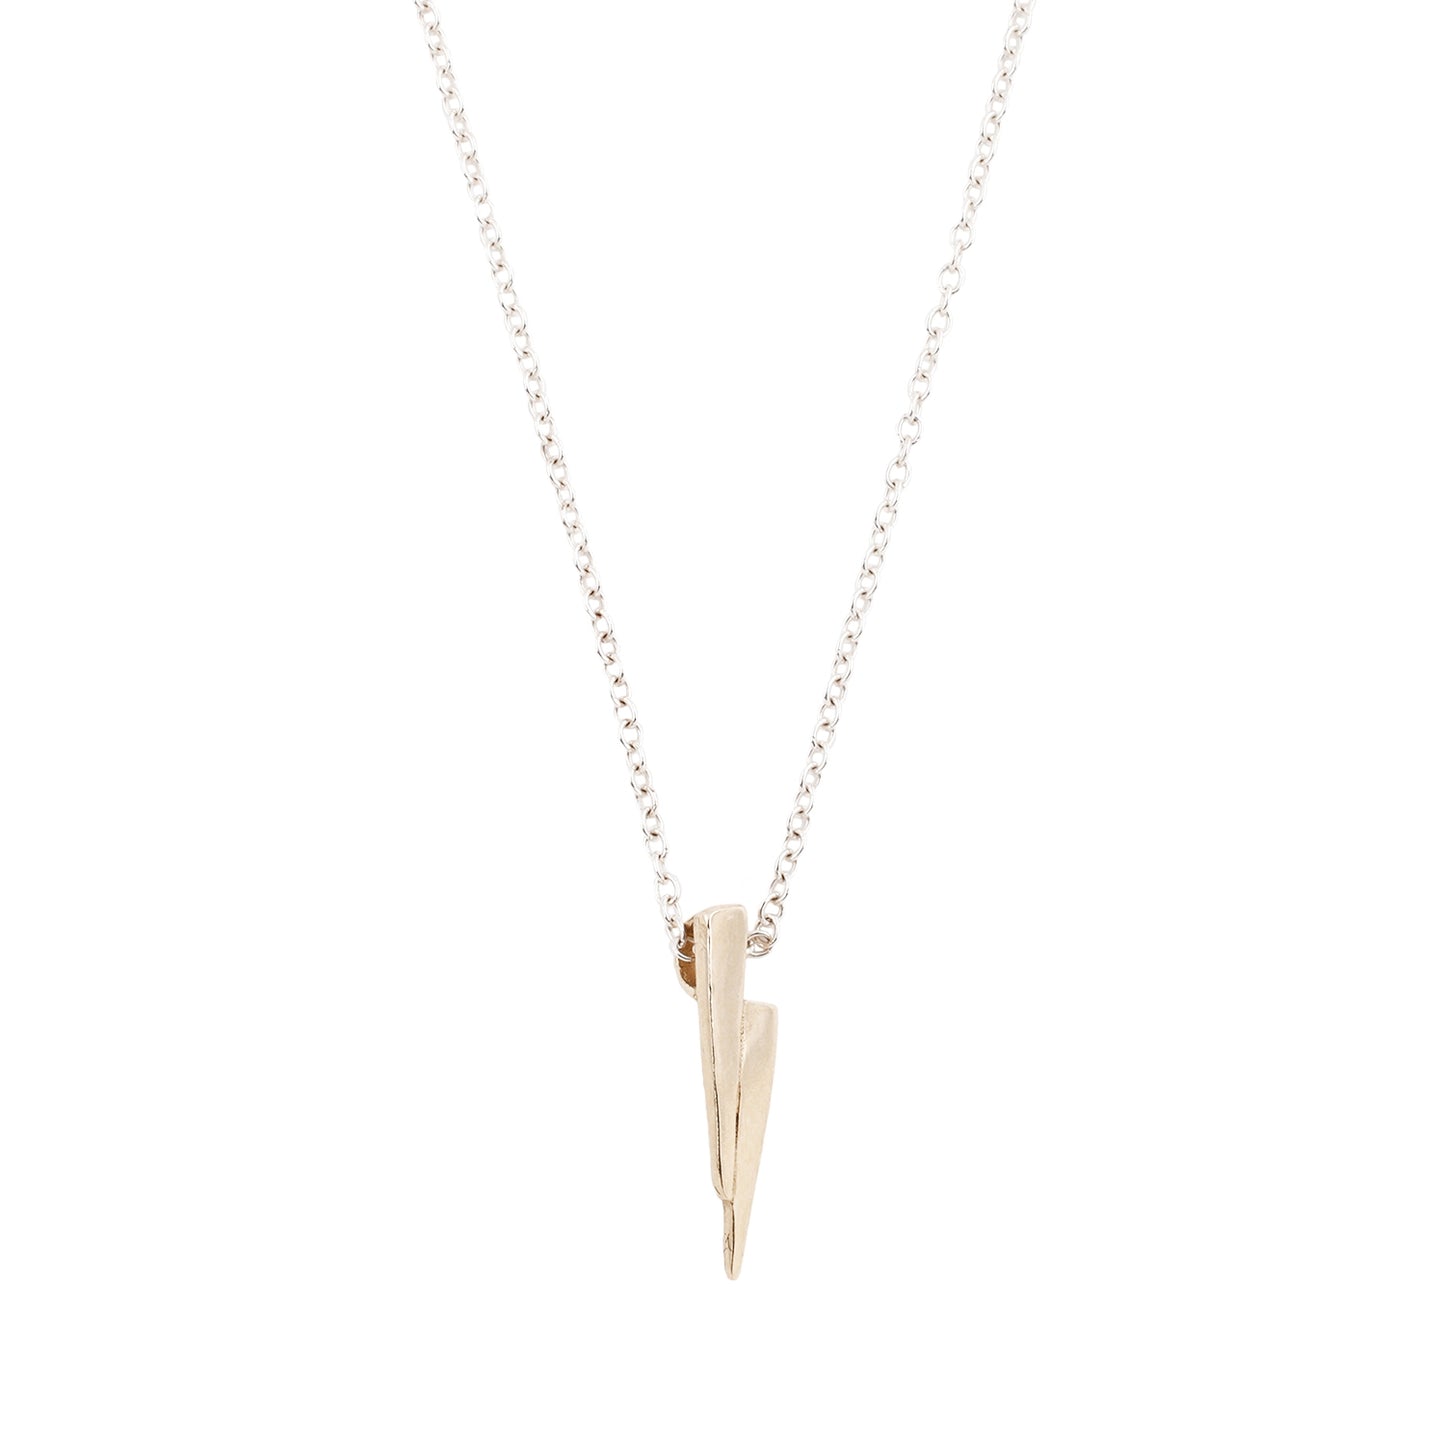 Gold On Silver Razor Necklace